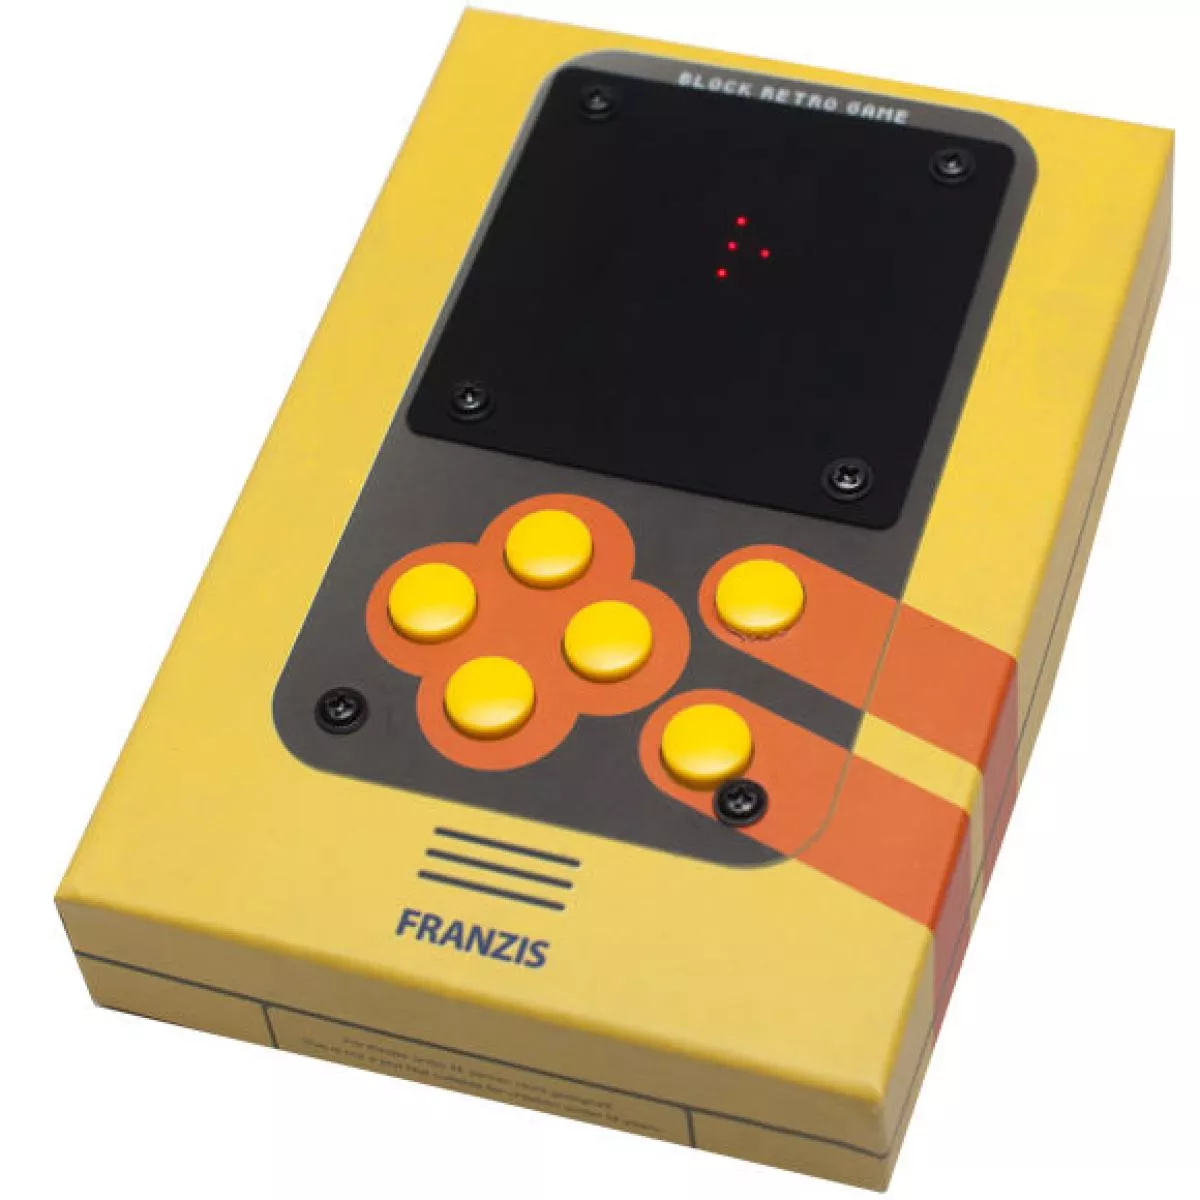 Electronic Retro Game "Block" as Kit for Self-Assembly